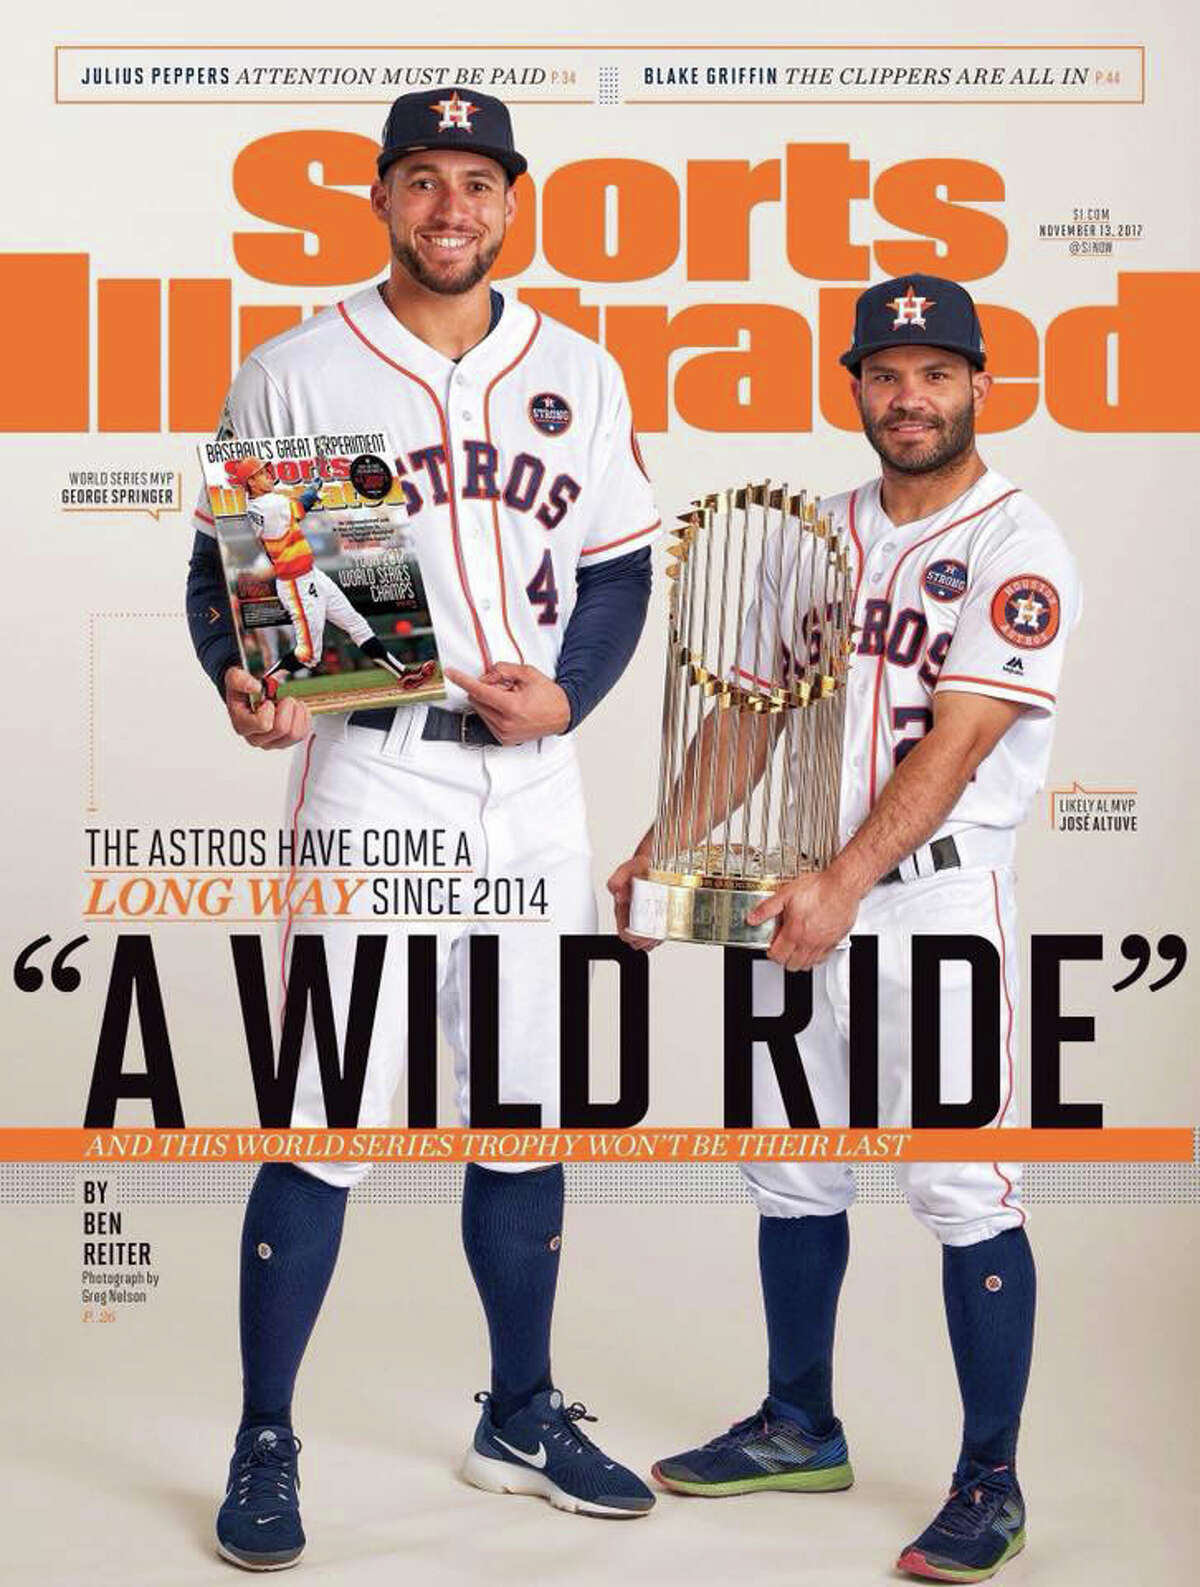 PHOTOS: Sports Illustrated covers featuring Houston teams The Astros' George Springer and Jose Altuve appear on the cover of the Nov. 13, 2017 issue of Sports Illustrated. Browse through the photos above for a look at Sports Illustrated covers featuring Houston teams.